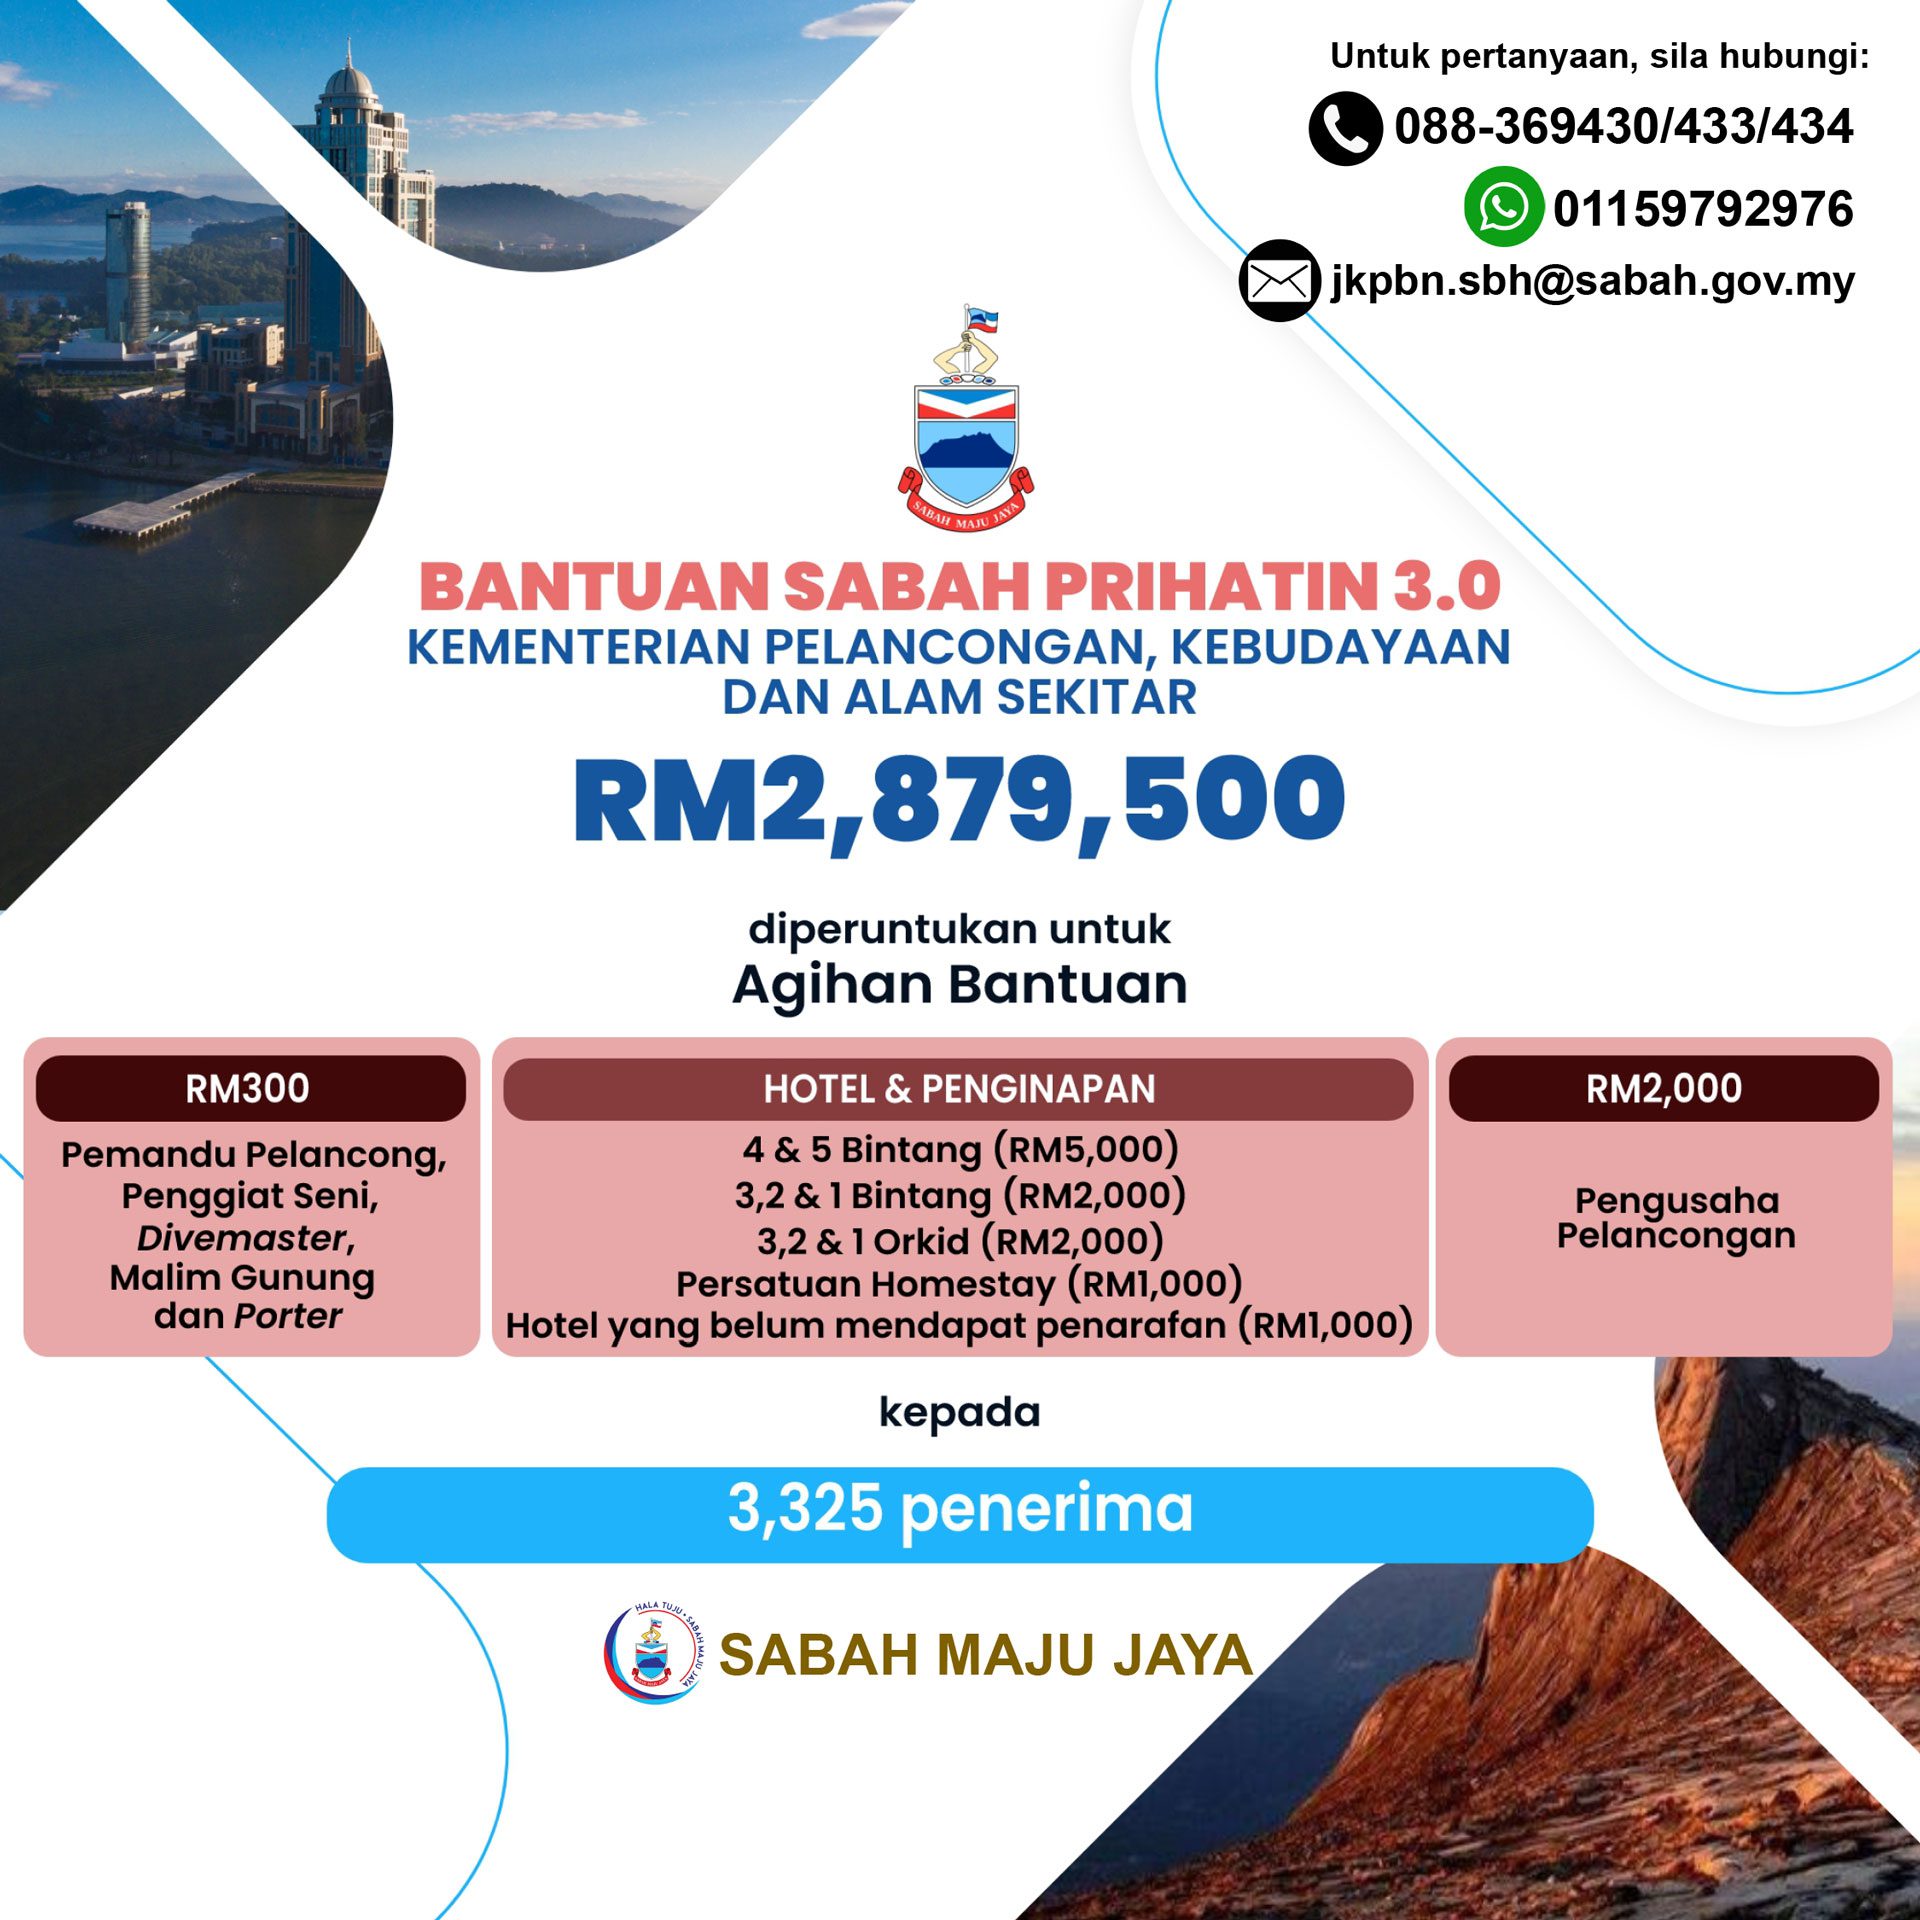 Ministry Of Tourism Culture And Environment Sabah Kepkas Official Website Of Ministry Of Tourism Culture And Environment Sabah